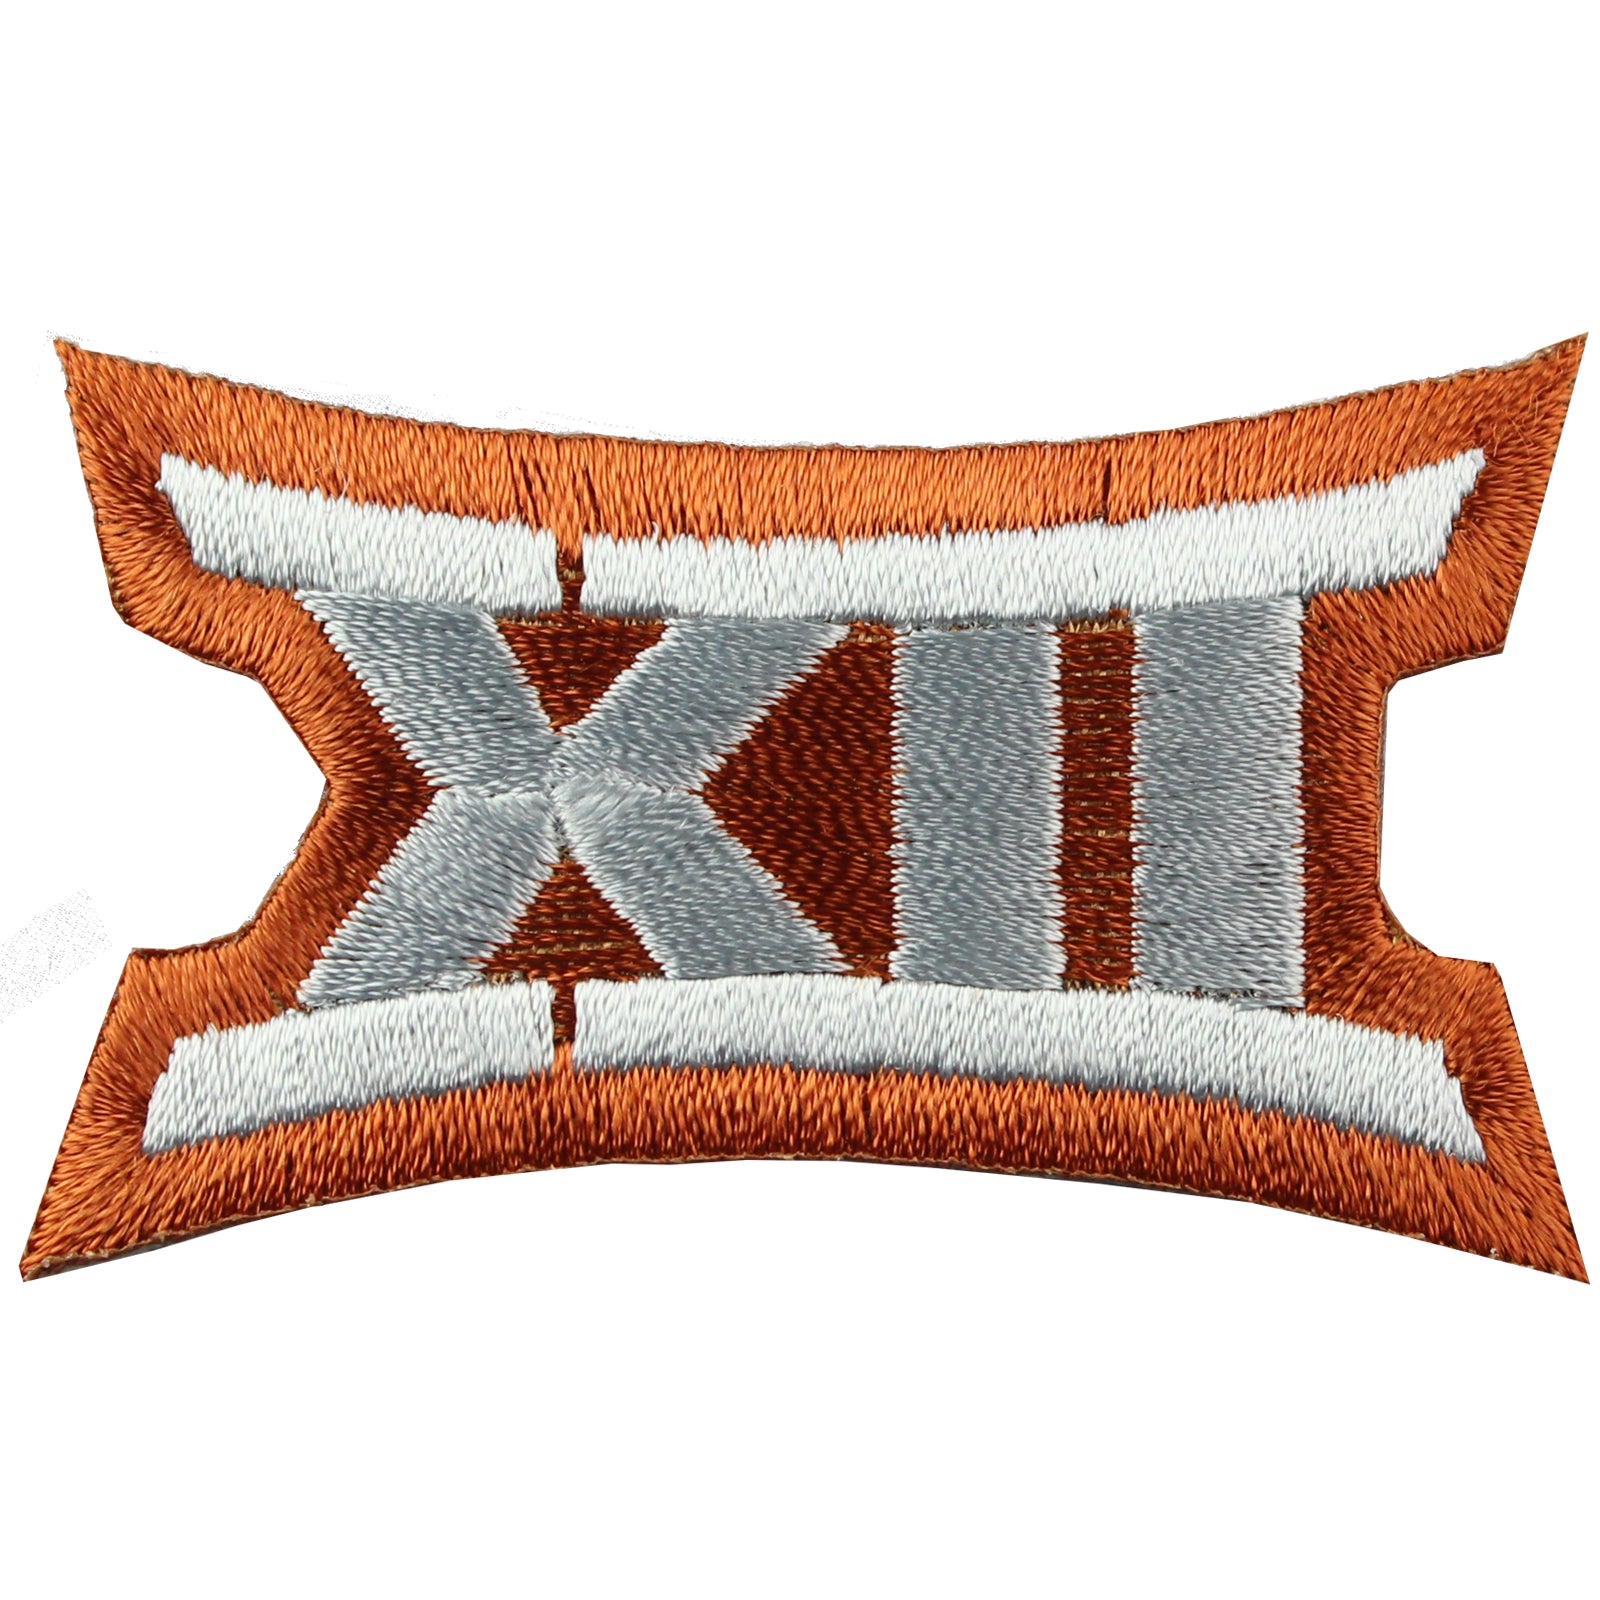 Big 12 XII Conference Team Jersey Uniform Patch Texas Longhorns 